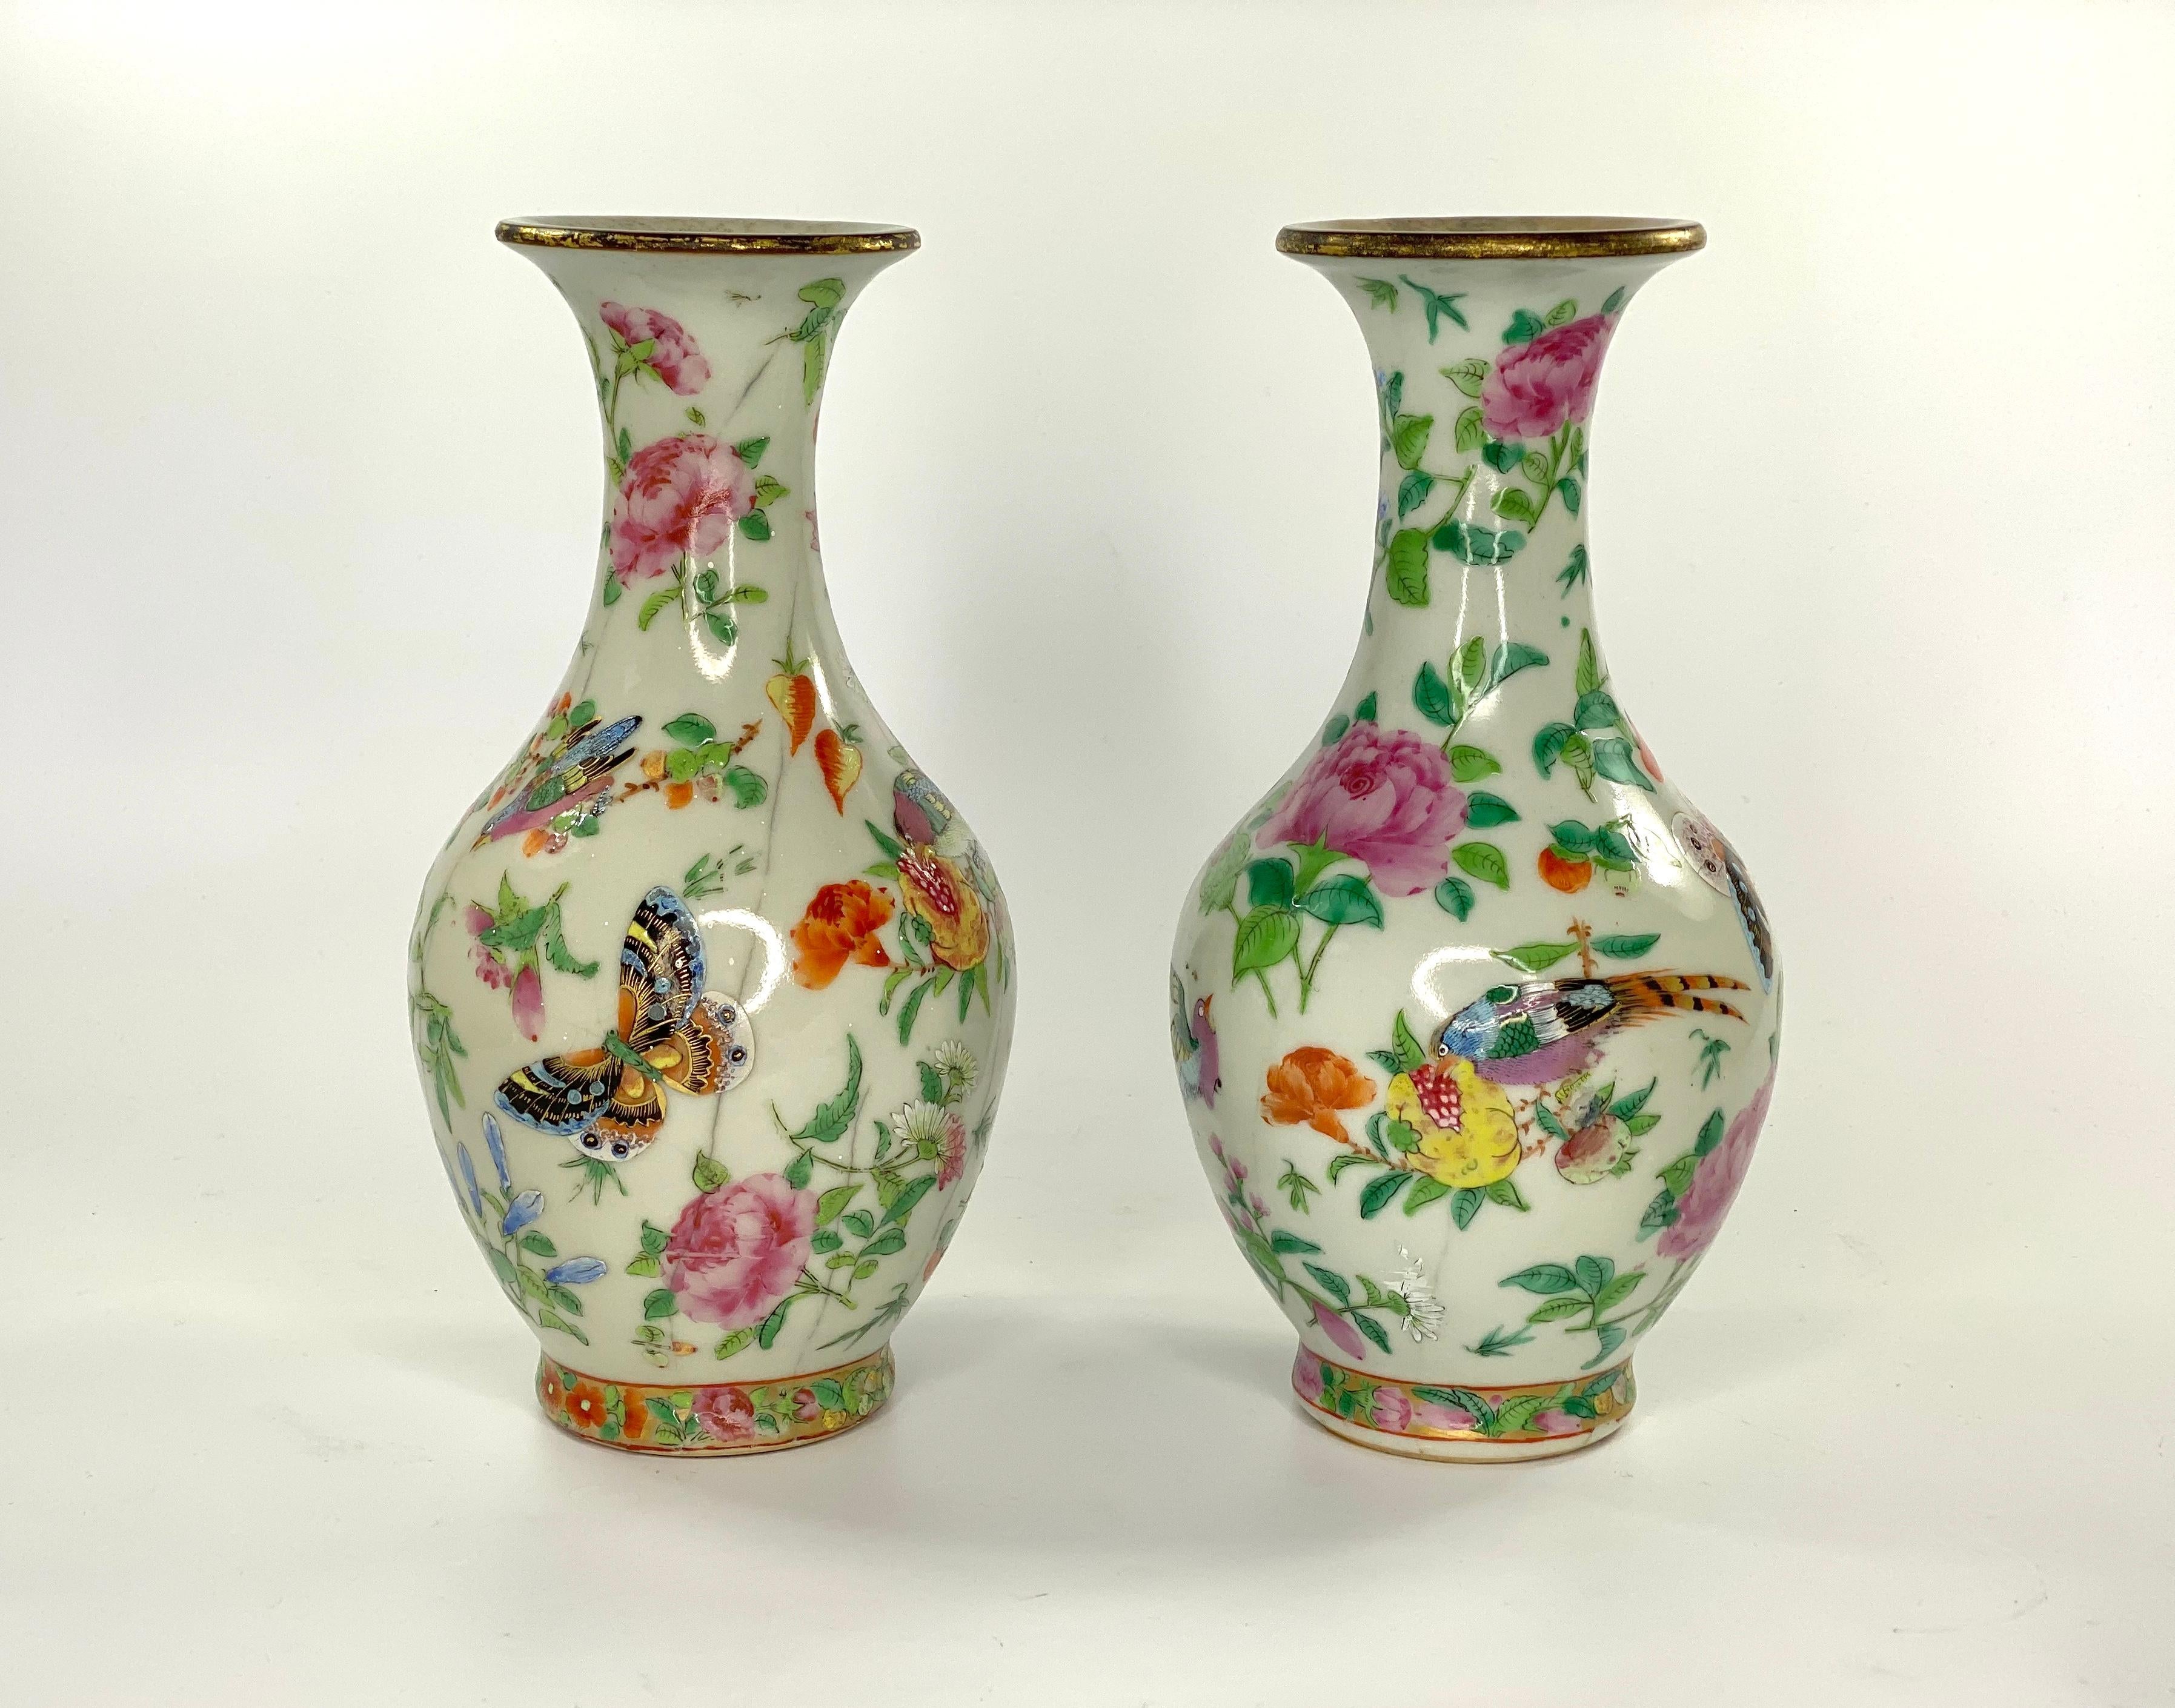 £690.00
Pair of Chinese porcelain ‘Guan’ type vases, circa 1880. The deliberately crackle glazed vases, well painted in Famille Rose enamels, with birds, insects and butterflies, flying amongst flowering plants, fruits and vegetables. All on a